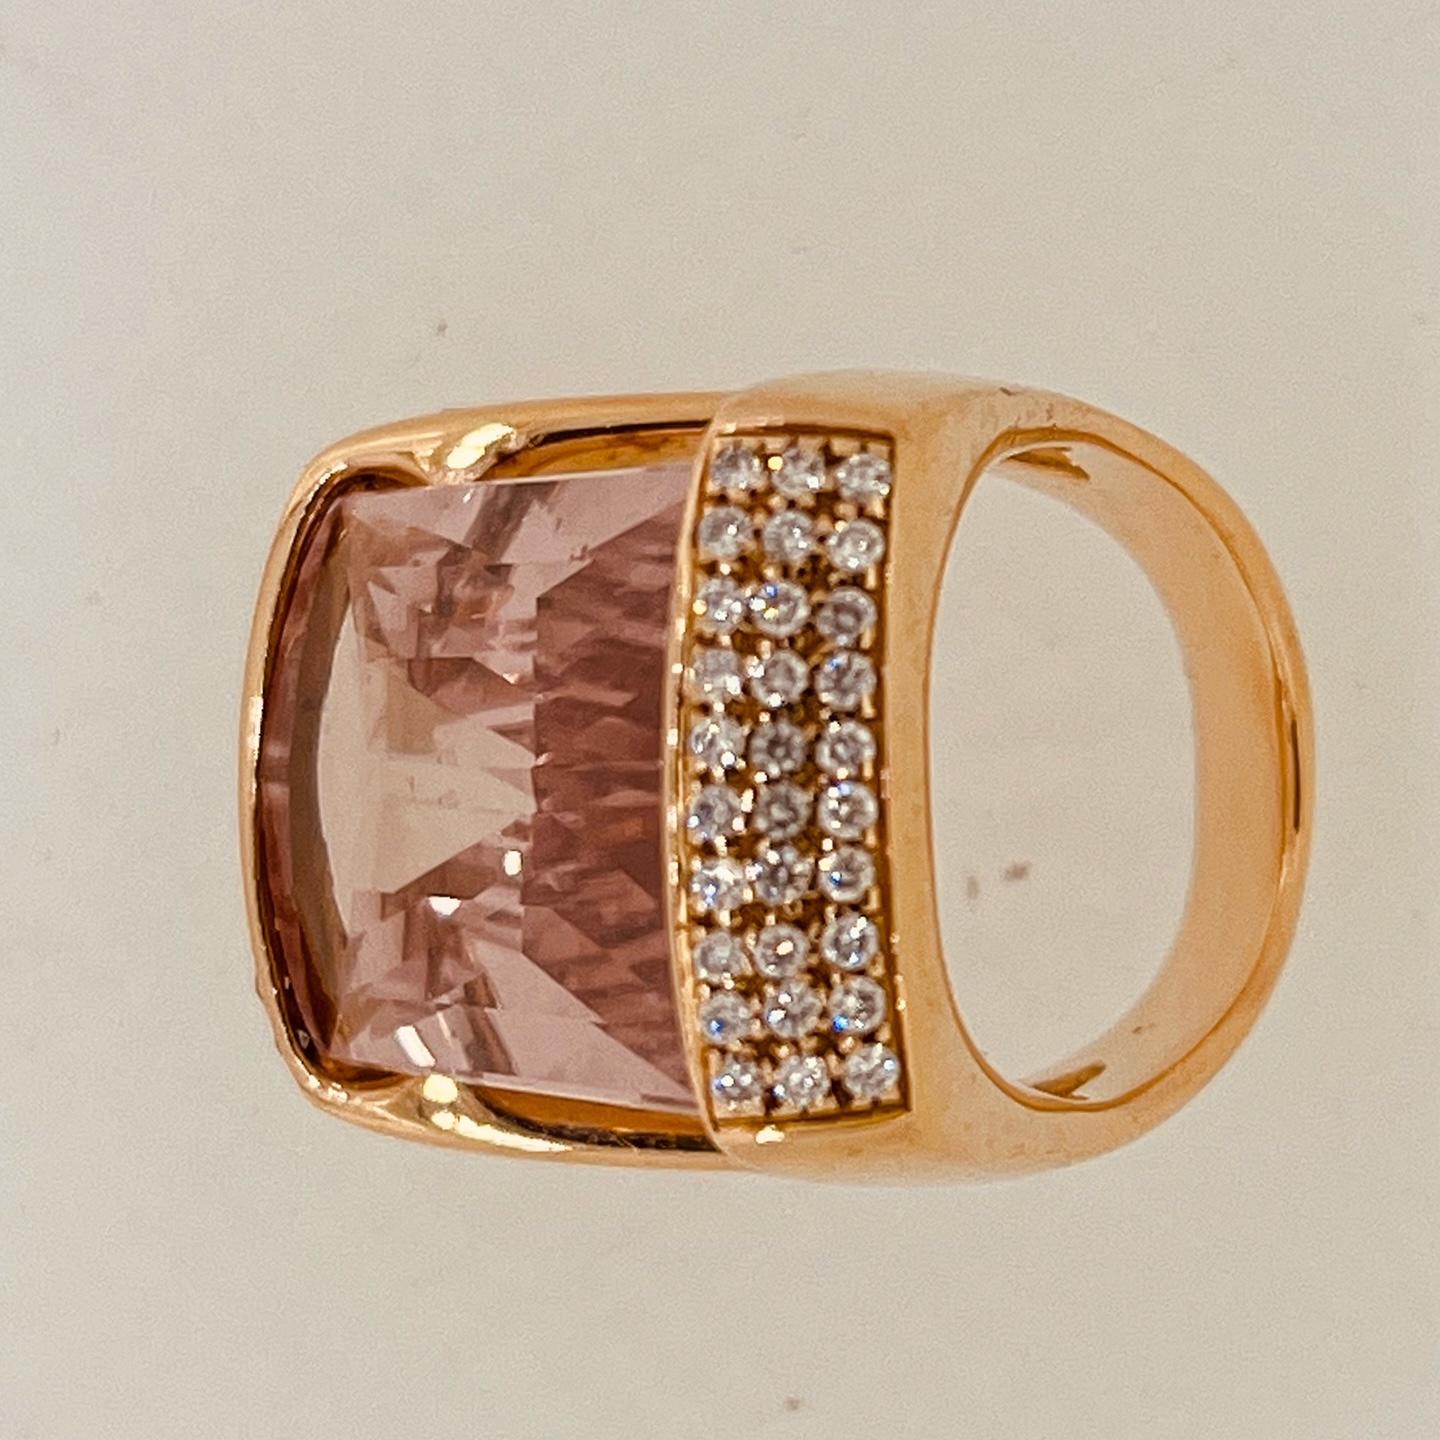 18ct Gold Ring Centering a Square Cut Morganite Suspended by 0.9ct Pave Diamonds For Sale 2